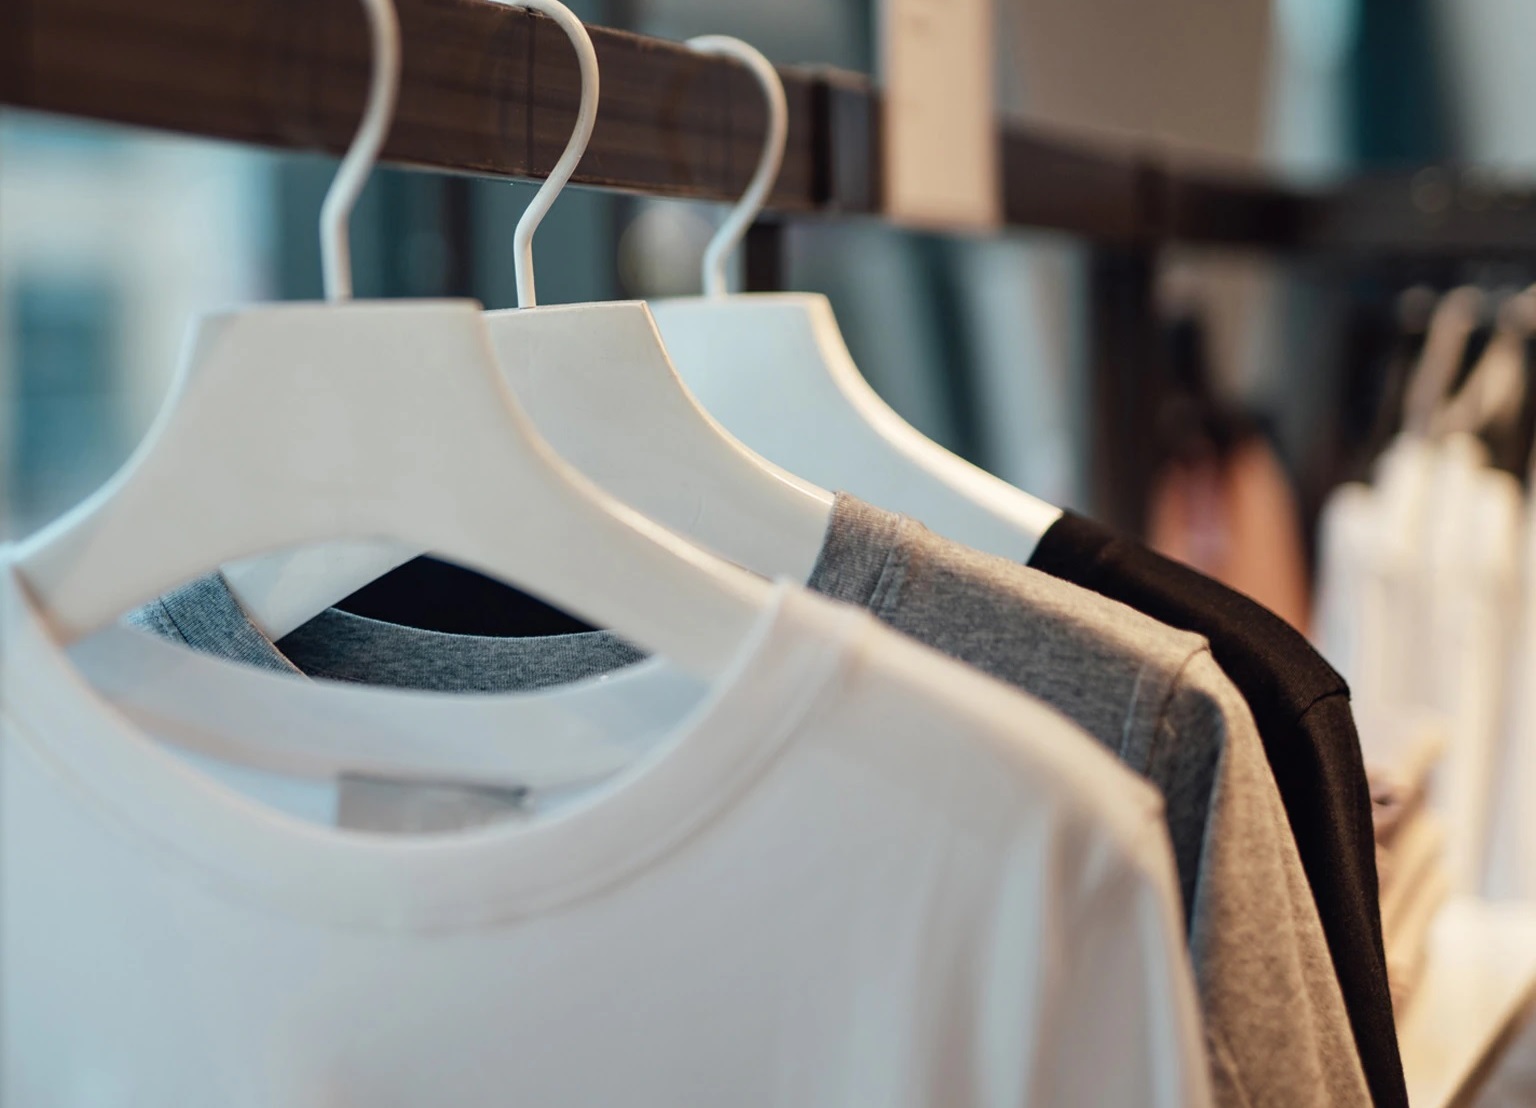 Right merchandising can help fashion brands succeed in today’s uncertain environment: McKinsey